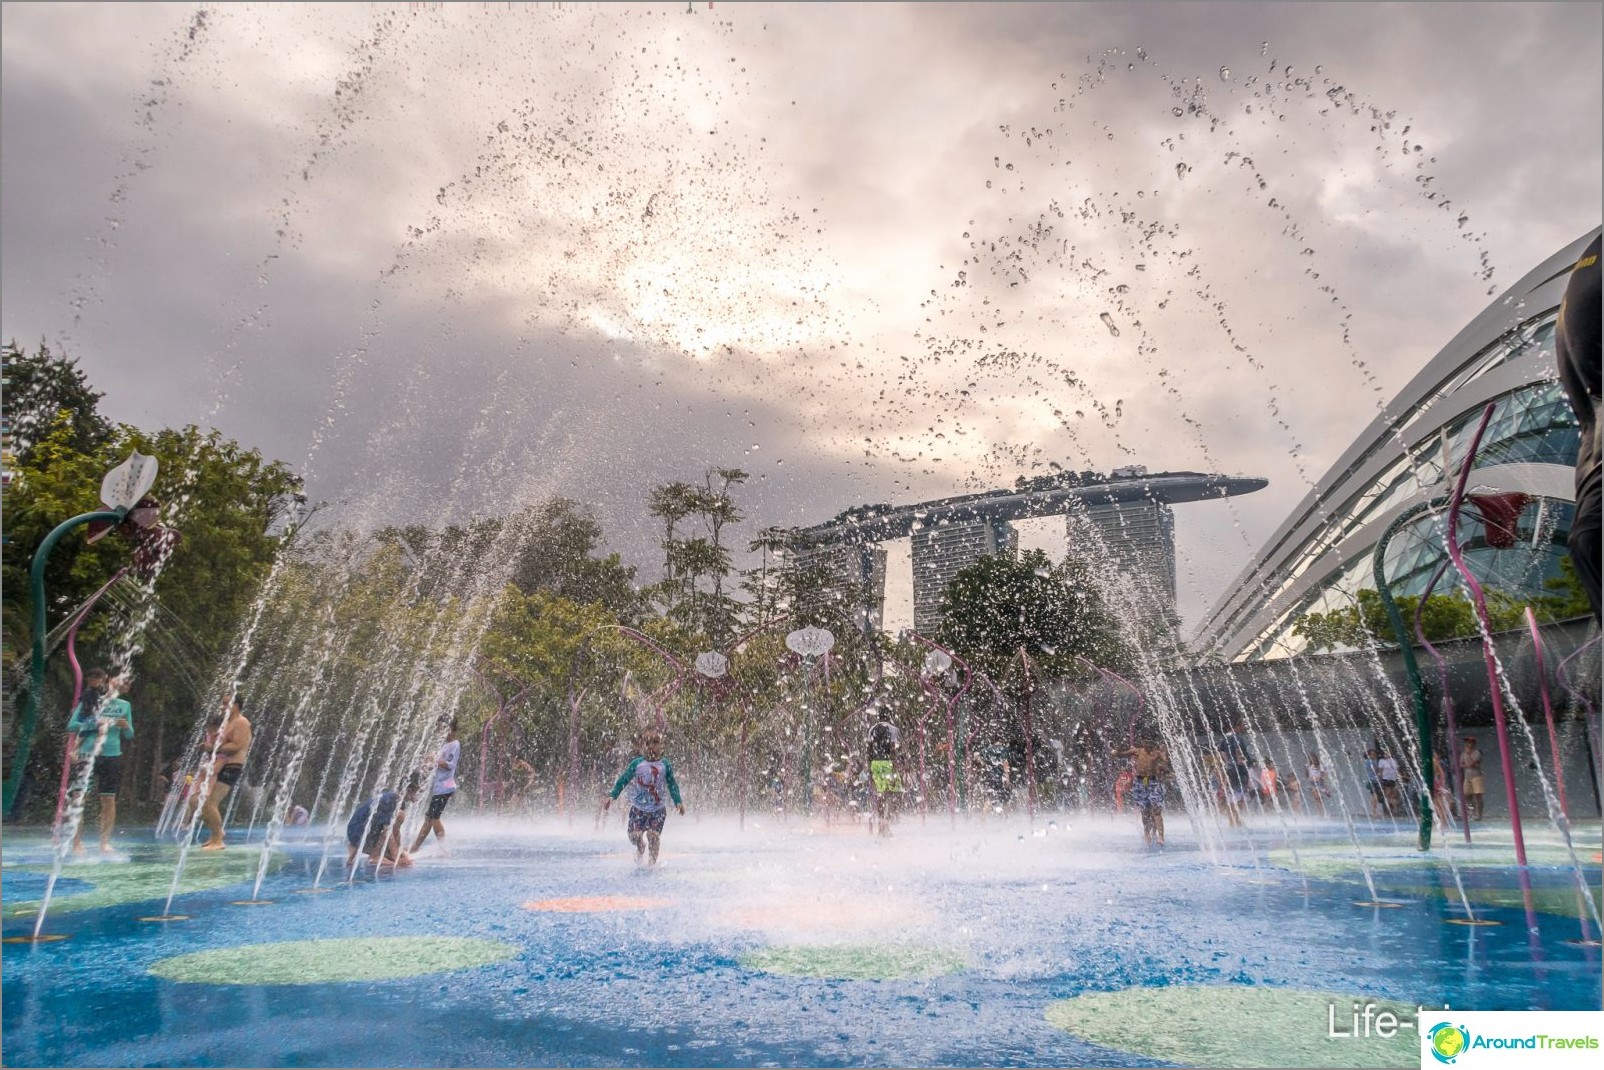 Gardens by the Bay in Singapore is the main attraction